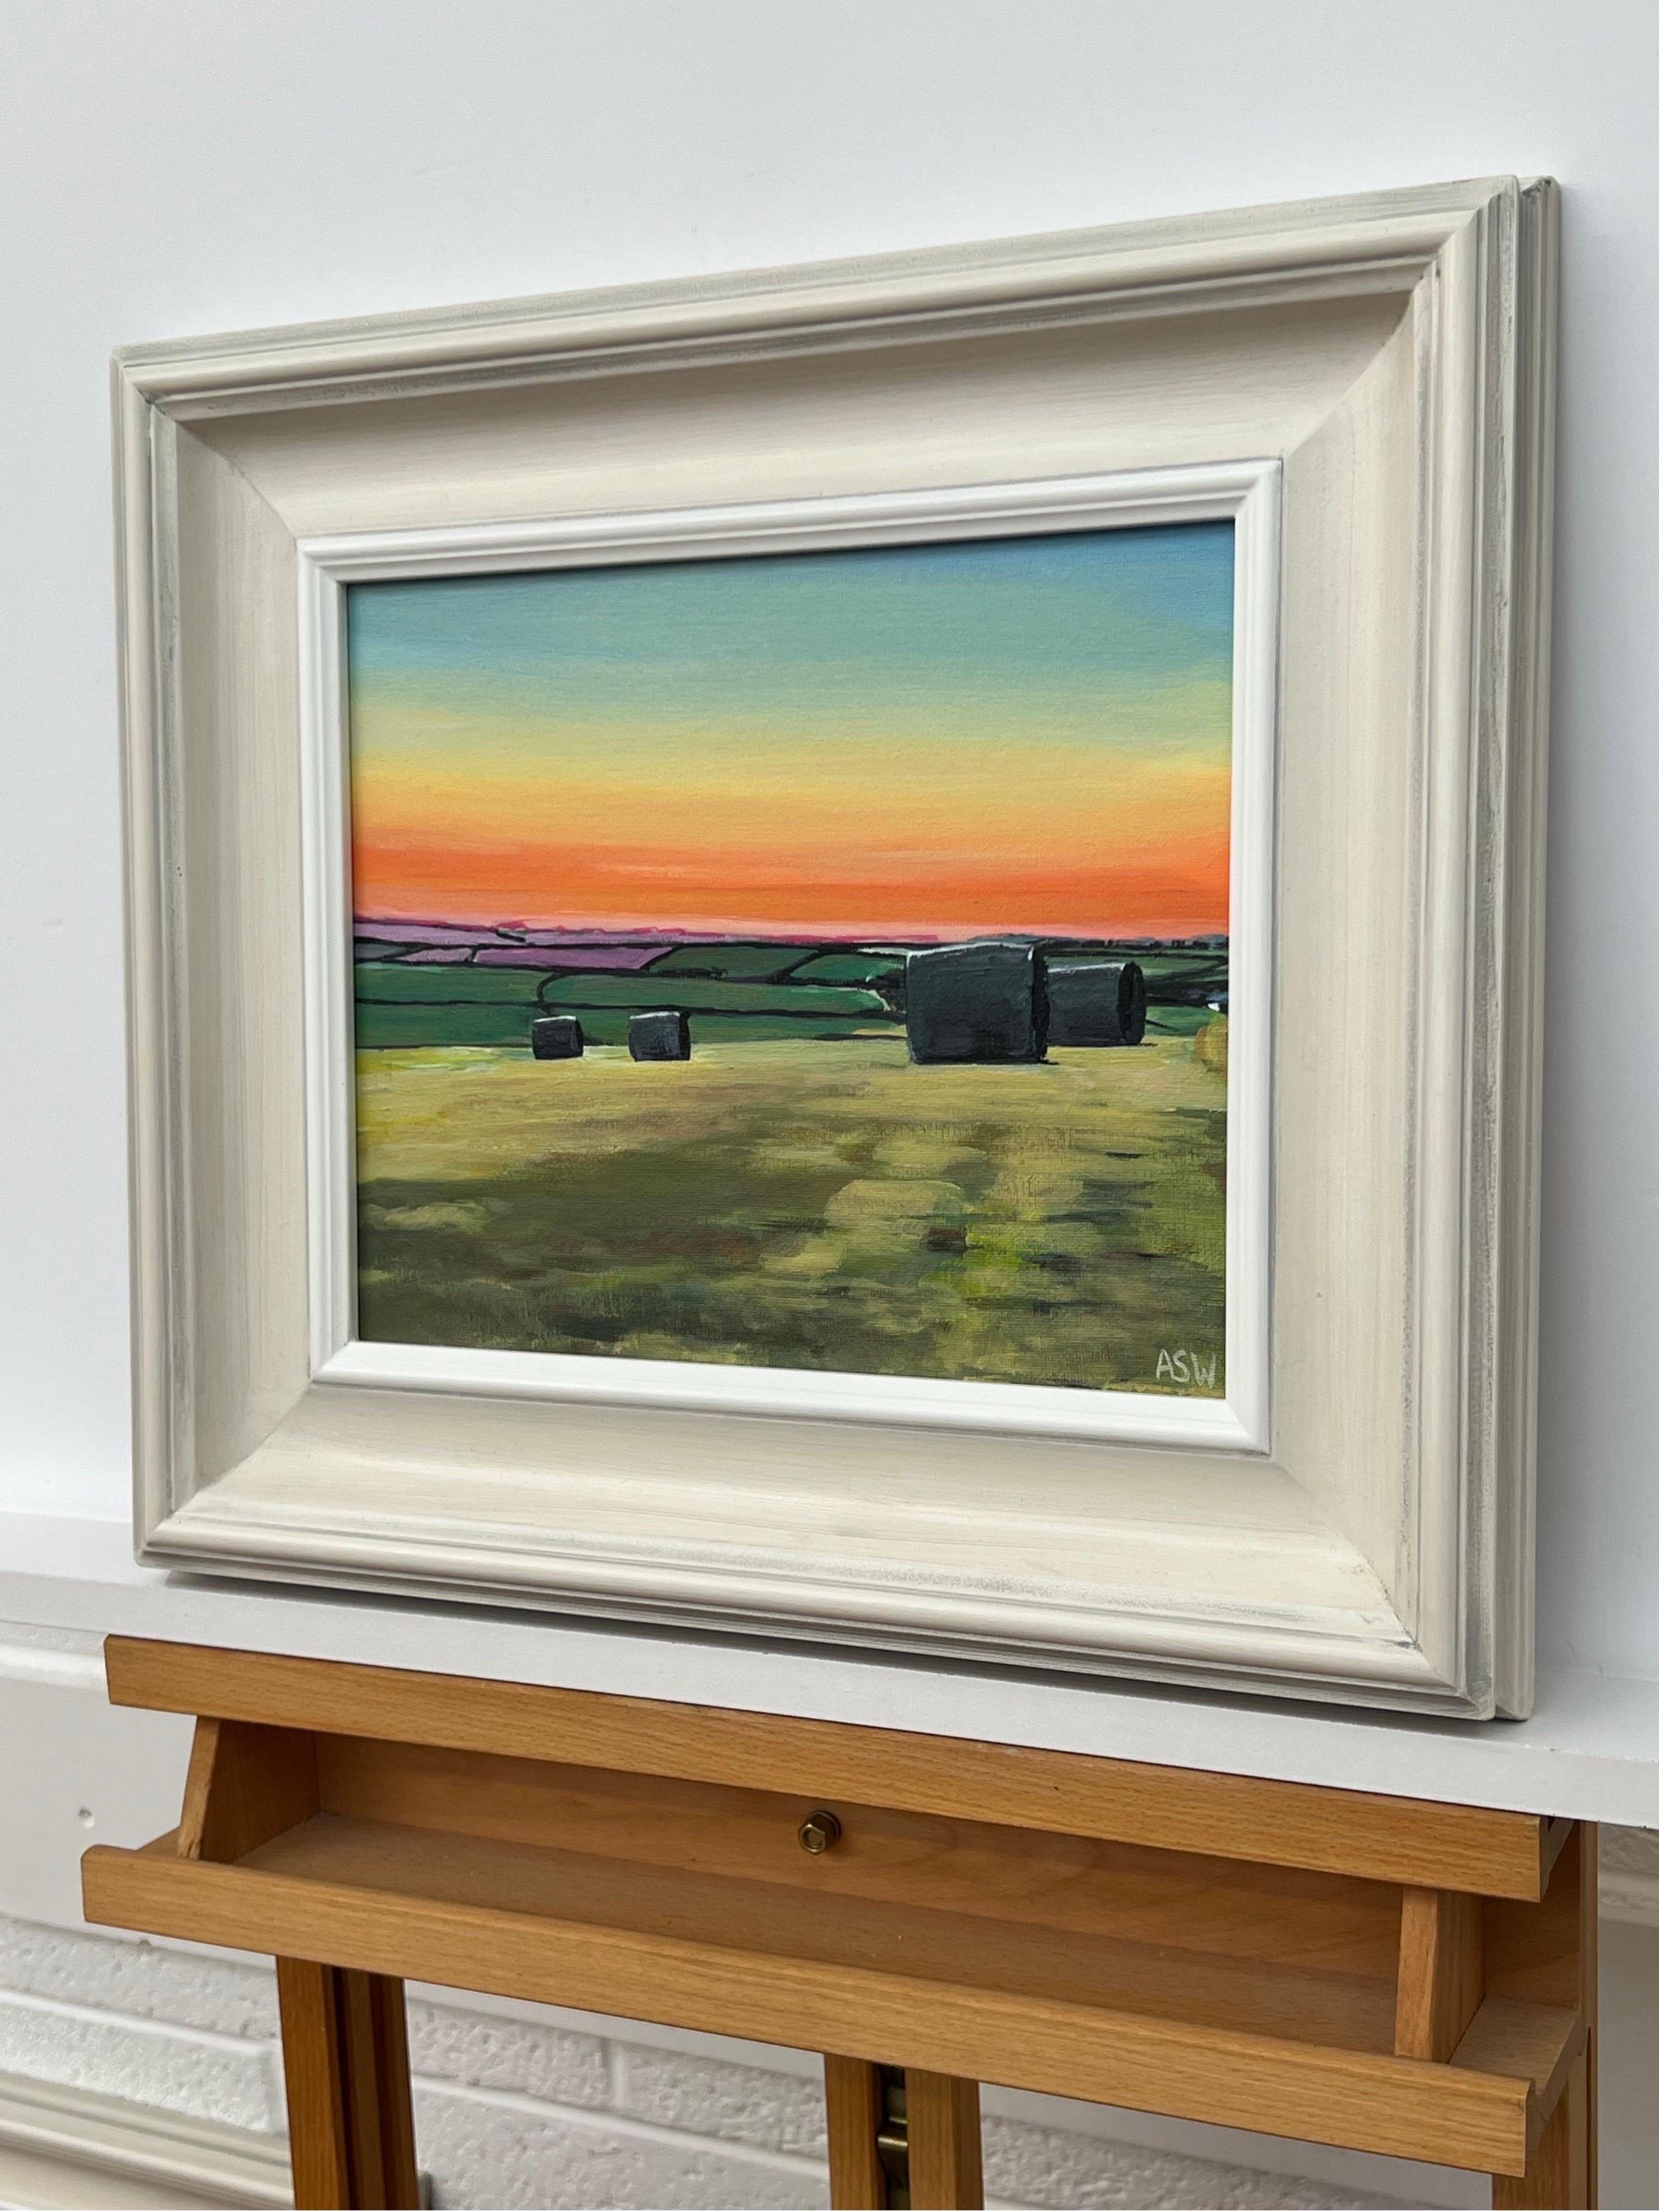 Hay Bales in Devon at Summer Sunset in the English Countryside by Contemporary British Artist, Angela Wakefield. A colourful depiction of a warm orange sunset during hay baling season at a farm on the south coast of England, with lush green fields